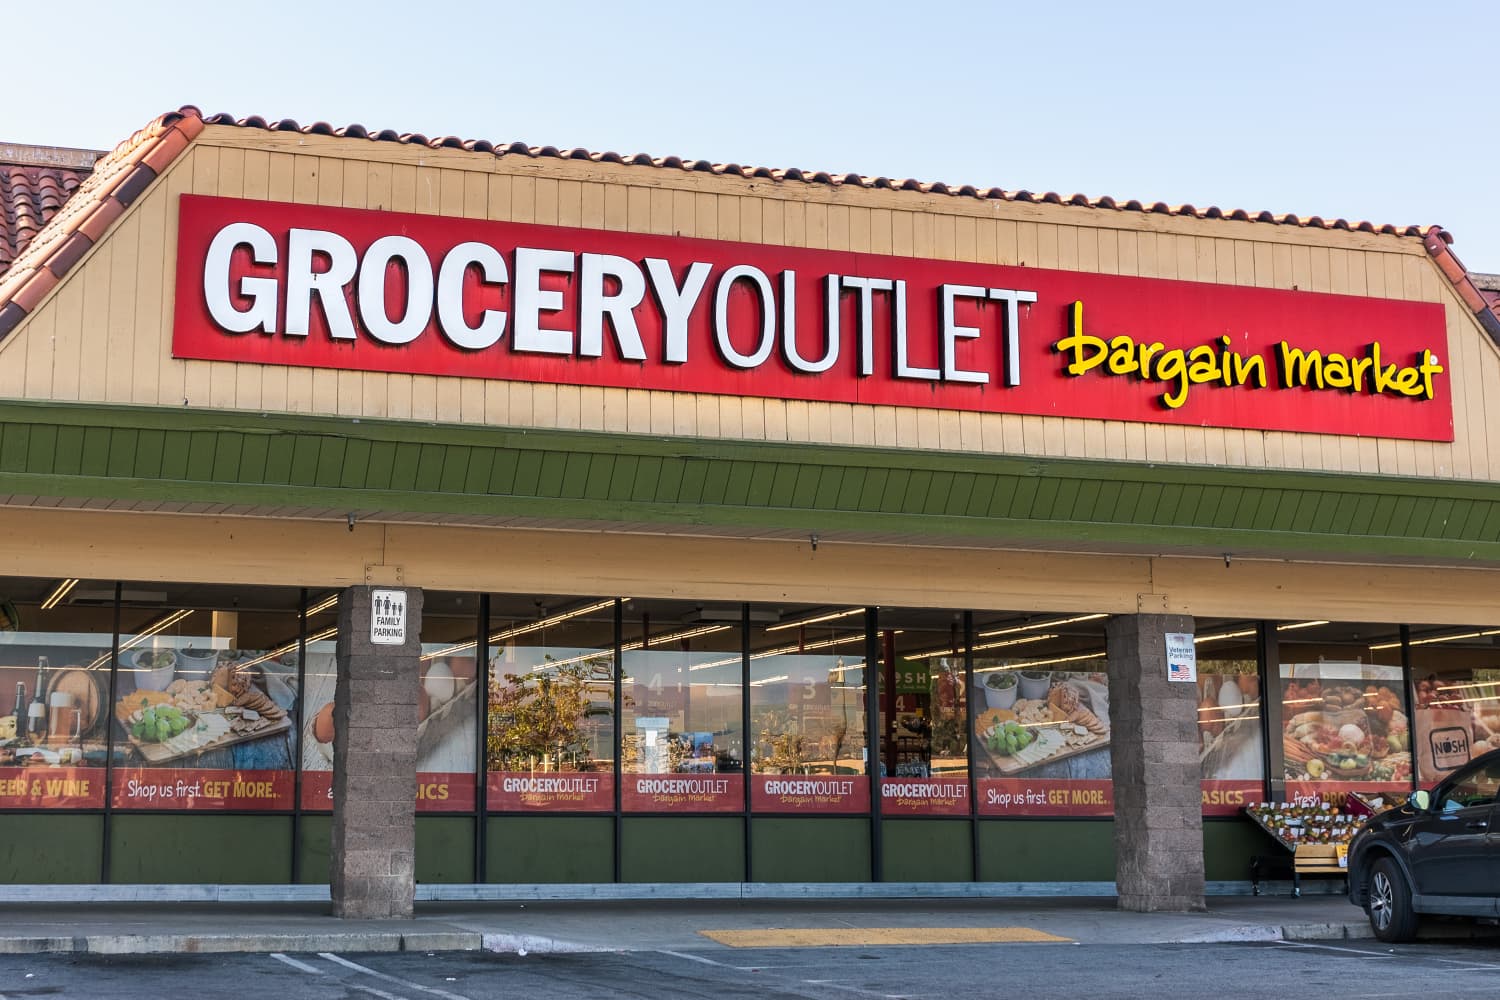 3 Grocery Outlet Dinner Finds for Spring (All $10 or Less)